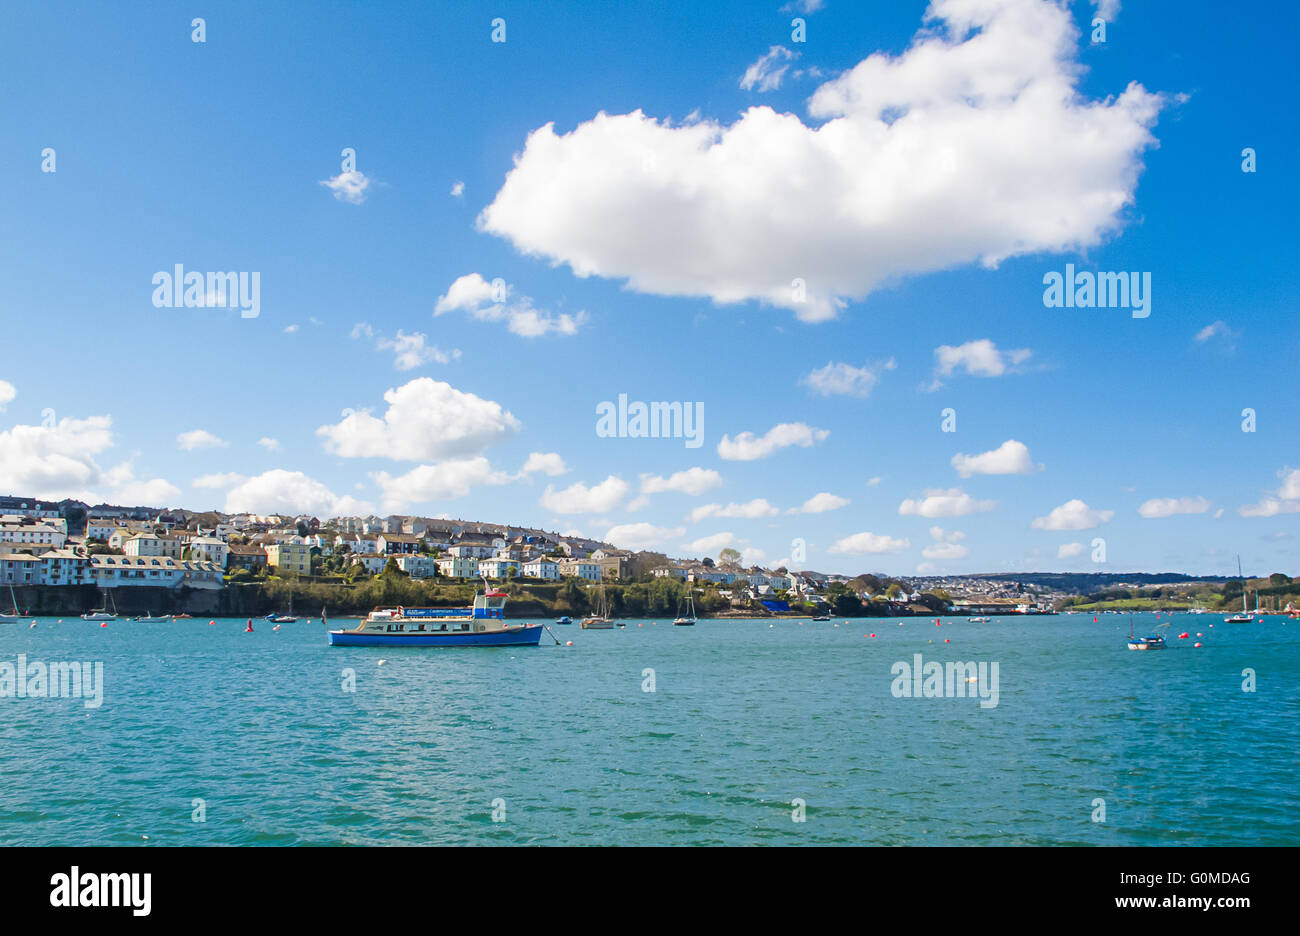 View of the Penryn River between Falmouth and Flushing in the UK, showing the Flushing ferry in the distance. Stock Photo